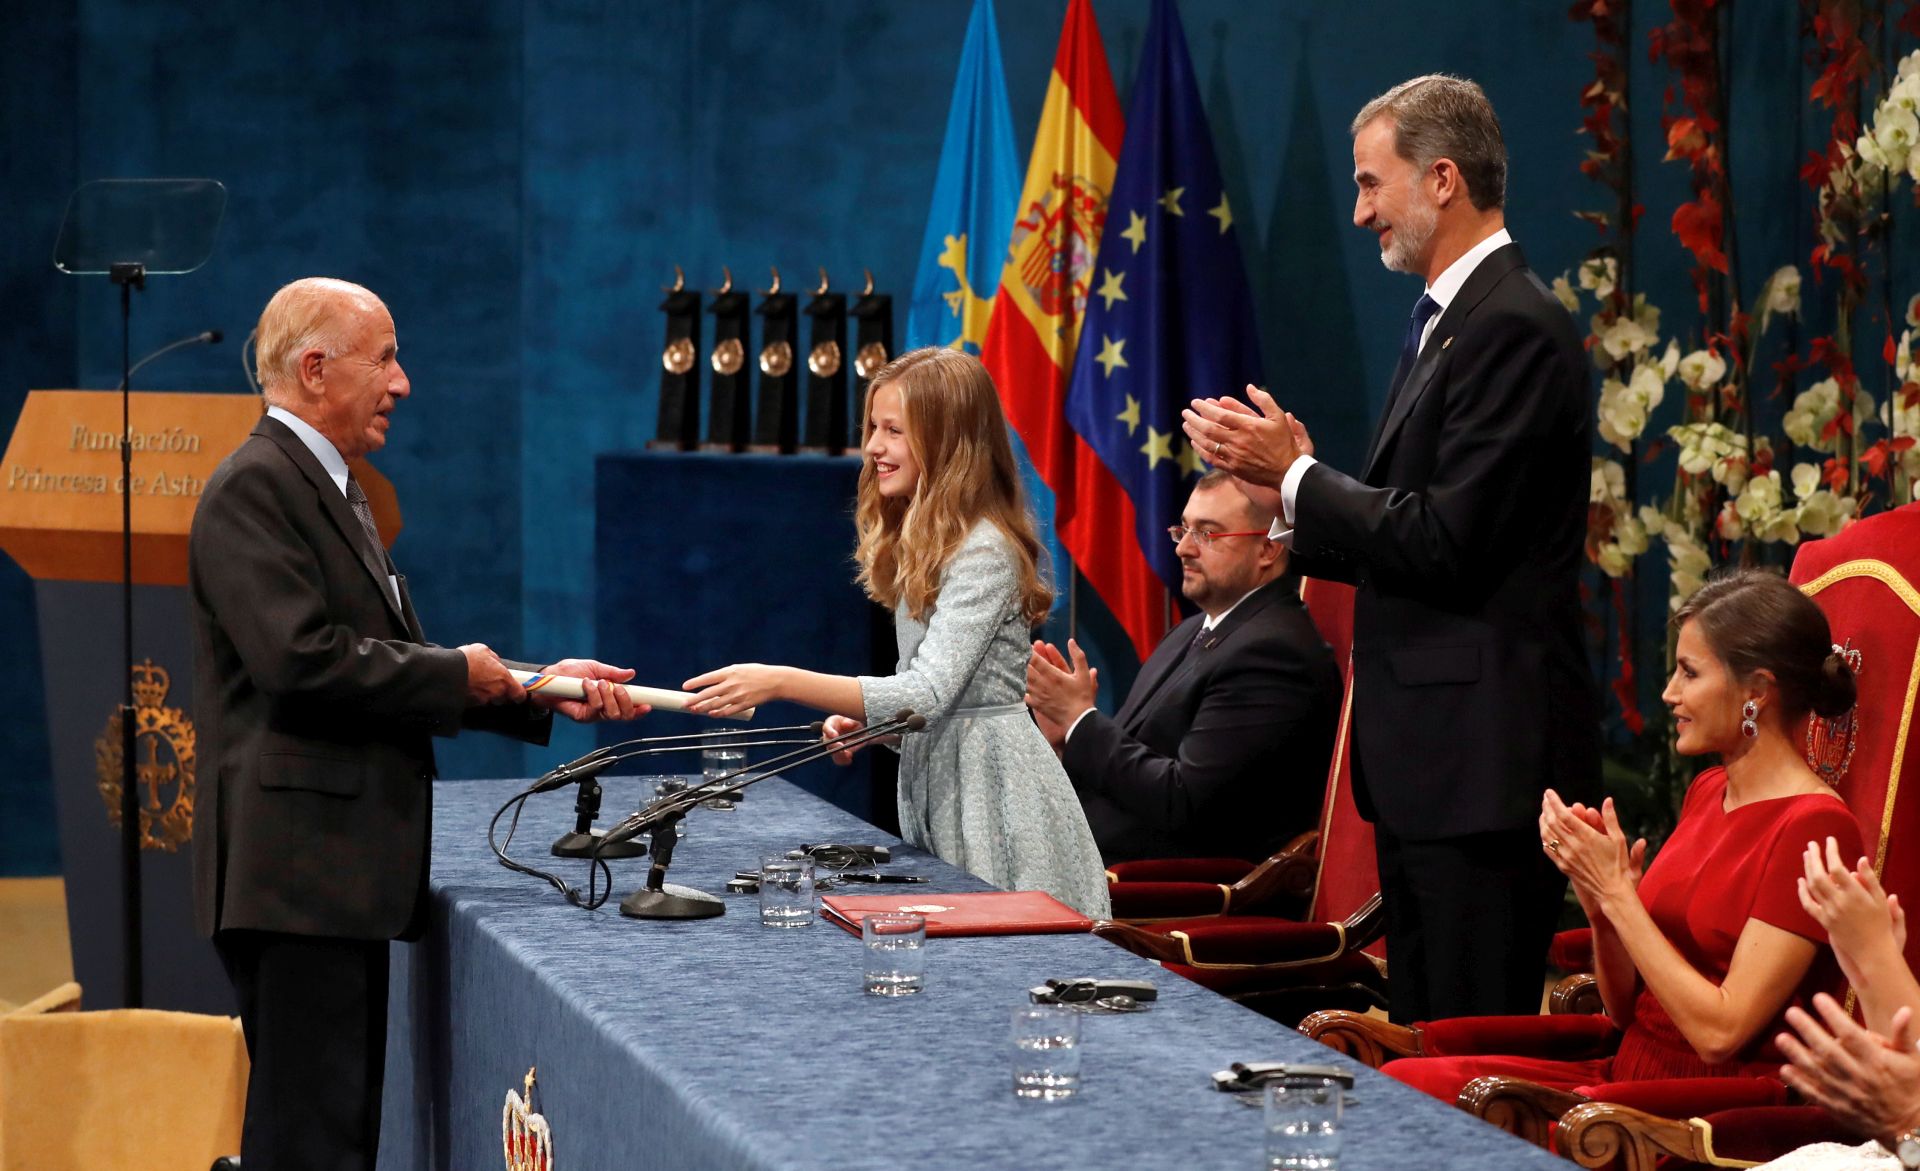 epa07930931 Spain's Crown Princess Leonor (2-L) presents US-Cuban sociologist Alejandro Portes (L) the Princess of Asturias 2019 Award for Social Sciences as her parents, King Felipe VI (2-R) and Queen Letizia (R), applaud during the 39th Princess of Asturias Awards ceremony at the Campoamor Theater in Oviedo, Asturias, northern Spain, 19 October 2019. The Princess of Asturias Awards are given every year to personalities or organizations from all around the world who make significant achievements in the sciences, arts, literature, humanities and sports.  EPA/Ballesteros